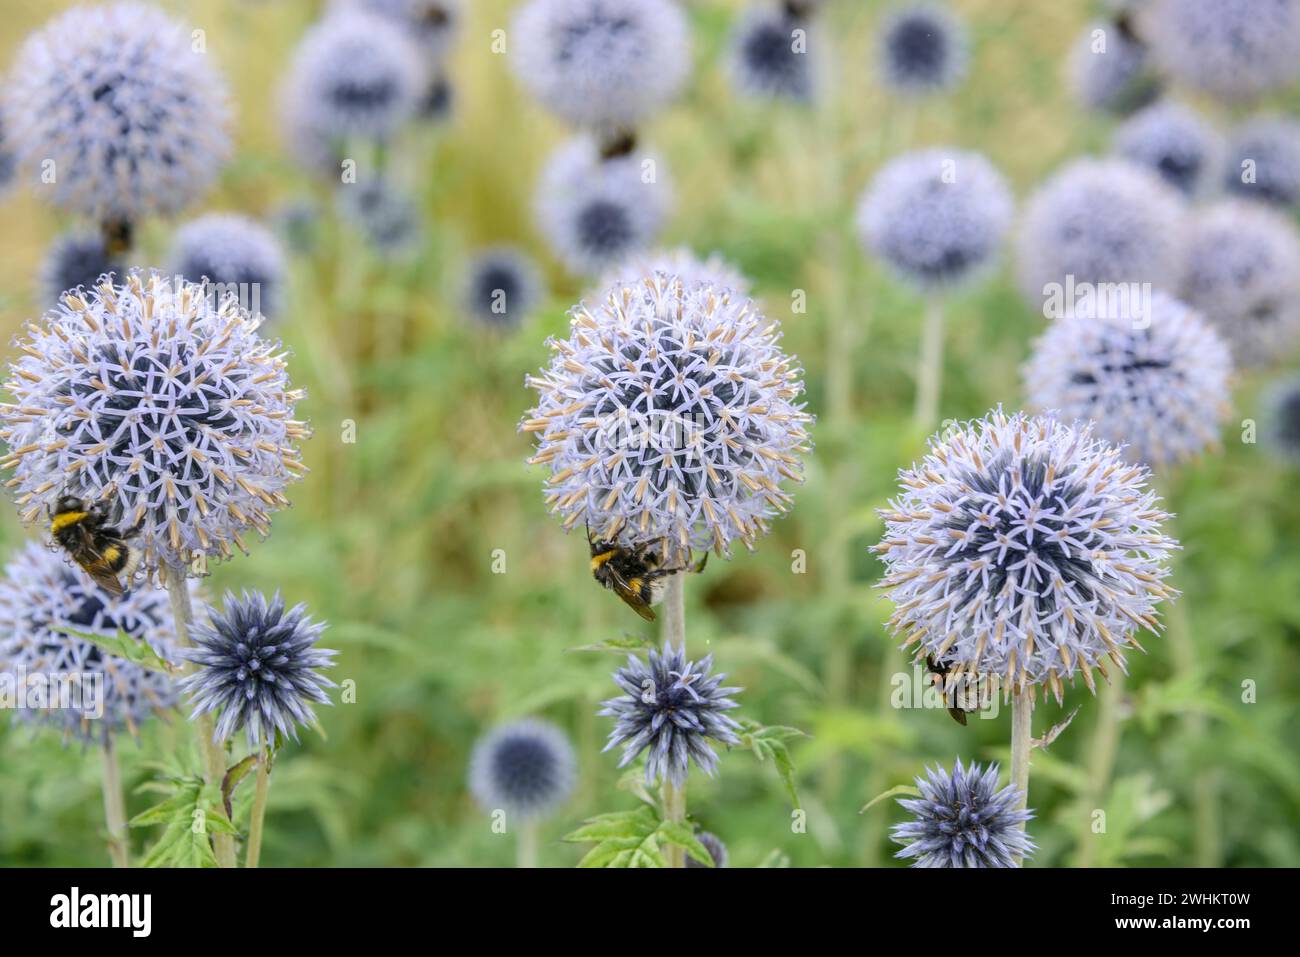 Banat globe thistle (Echinops bannaticus 'Taplow Blue'), Osnabrueck University of Applied Sciences, Federal Republic of Germany Stock Photo